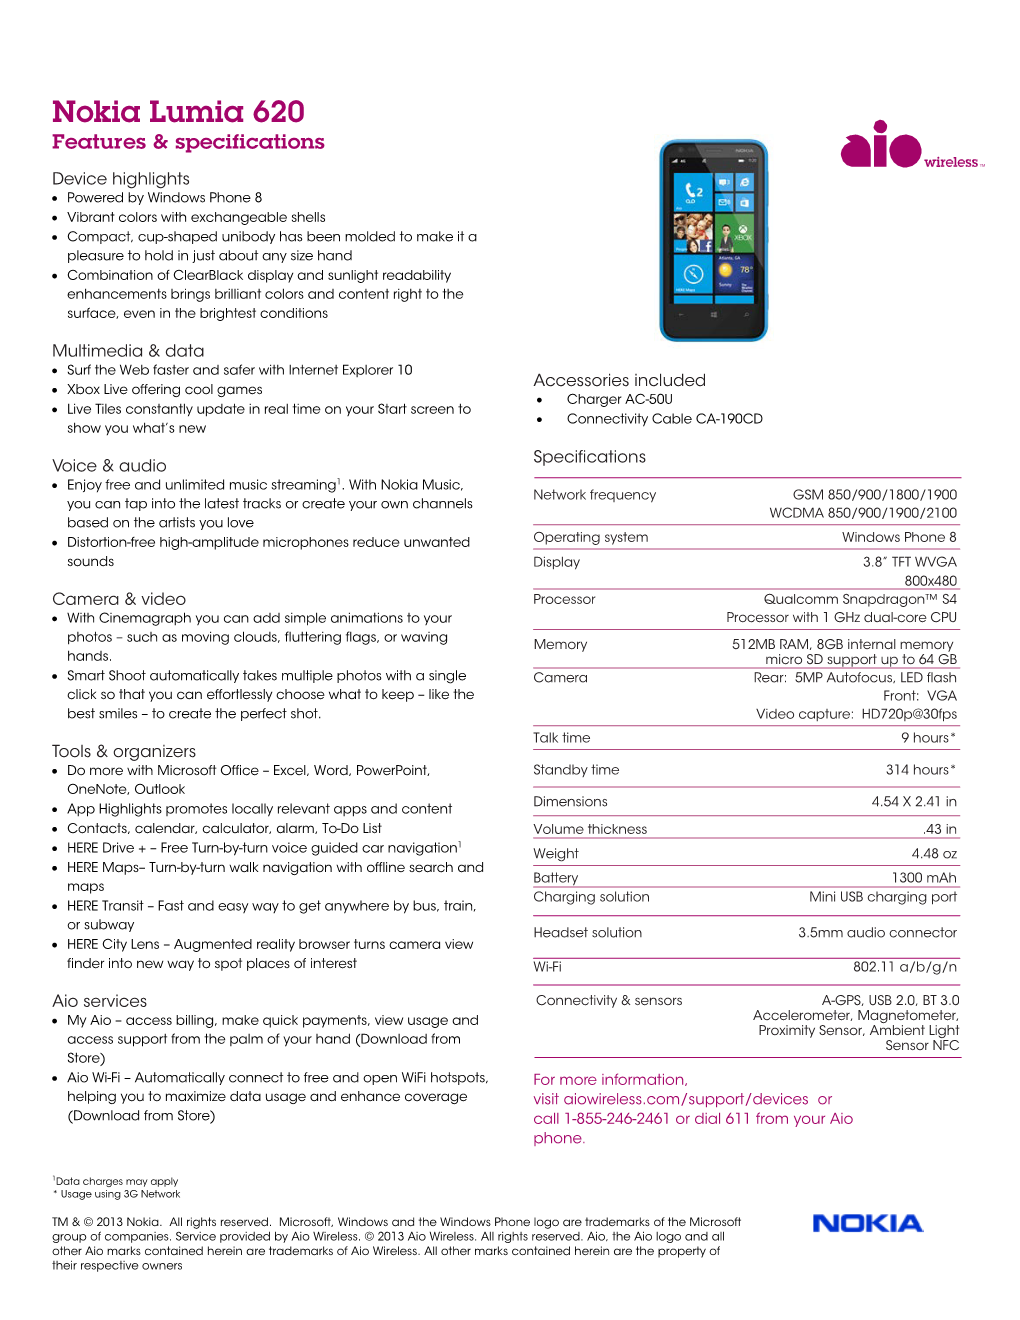 Nokia Lumia 620 Features & Specifications